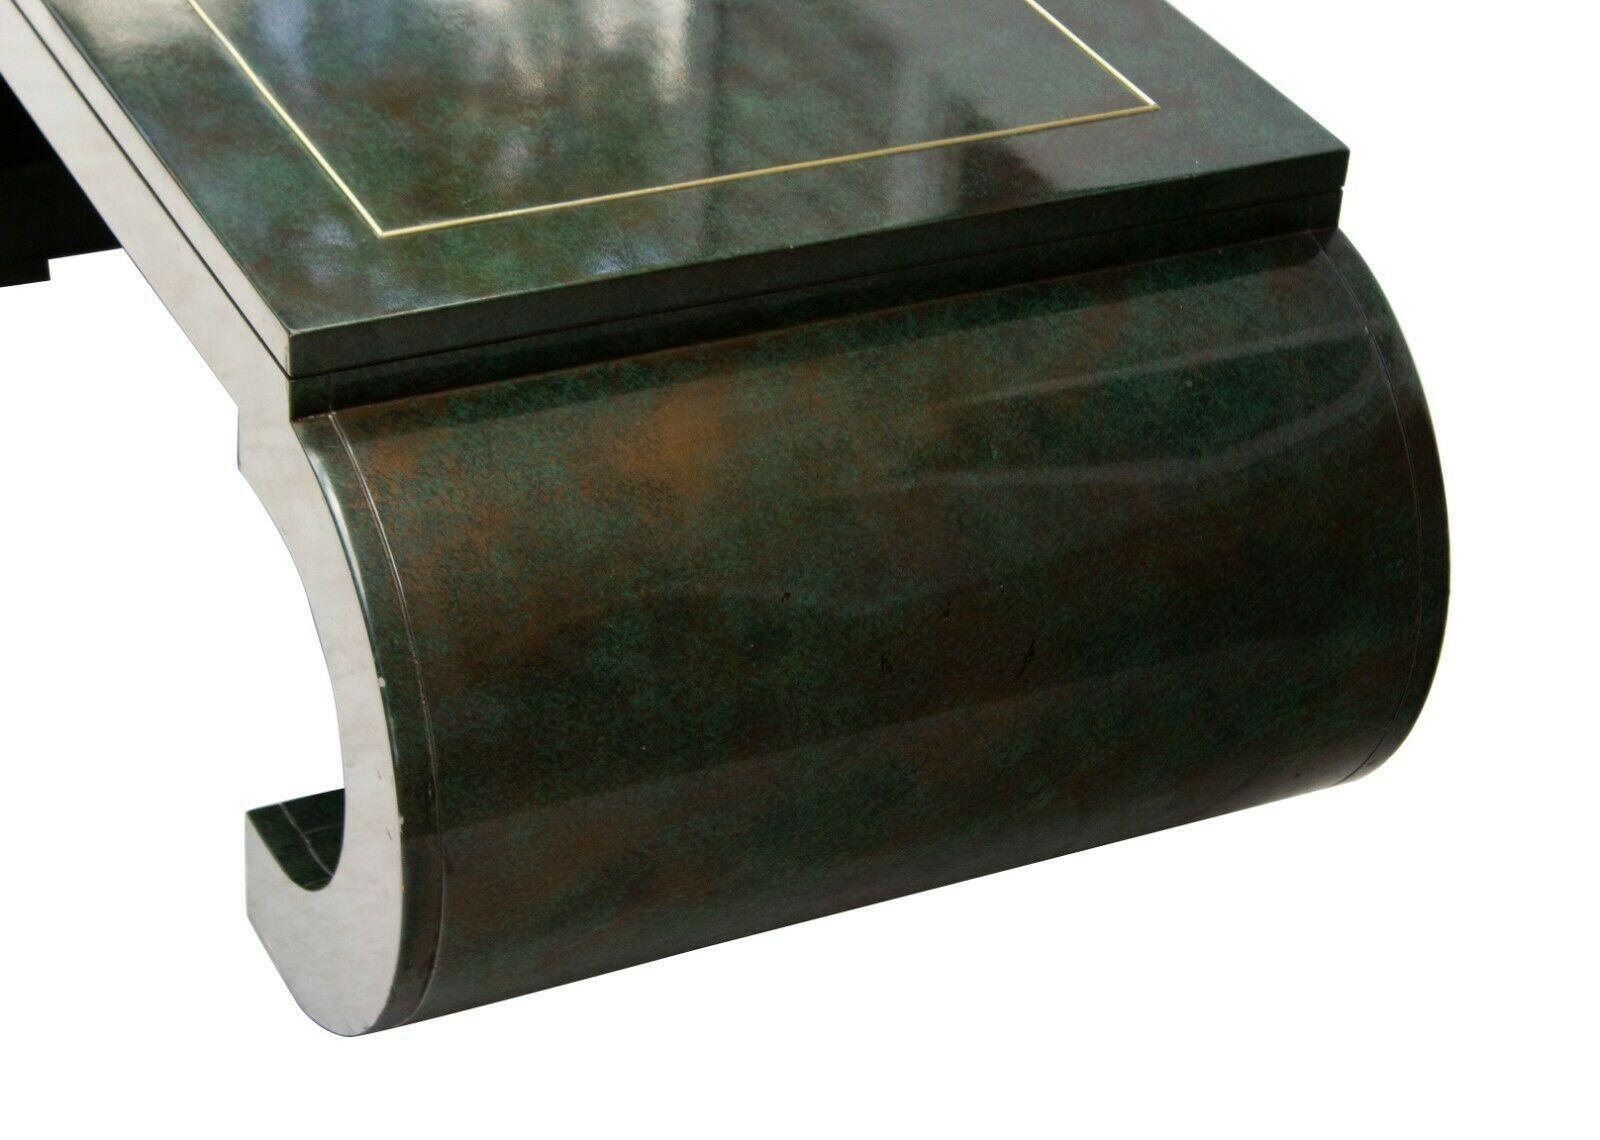 Late 20th Century Chinoiserie Scroll Coffee Table Dark Green Lacquer with Brass Bead by Mastercraf